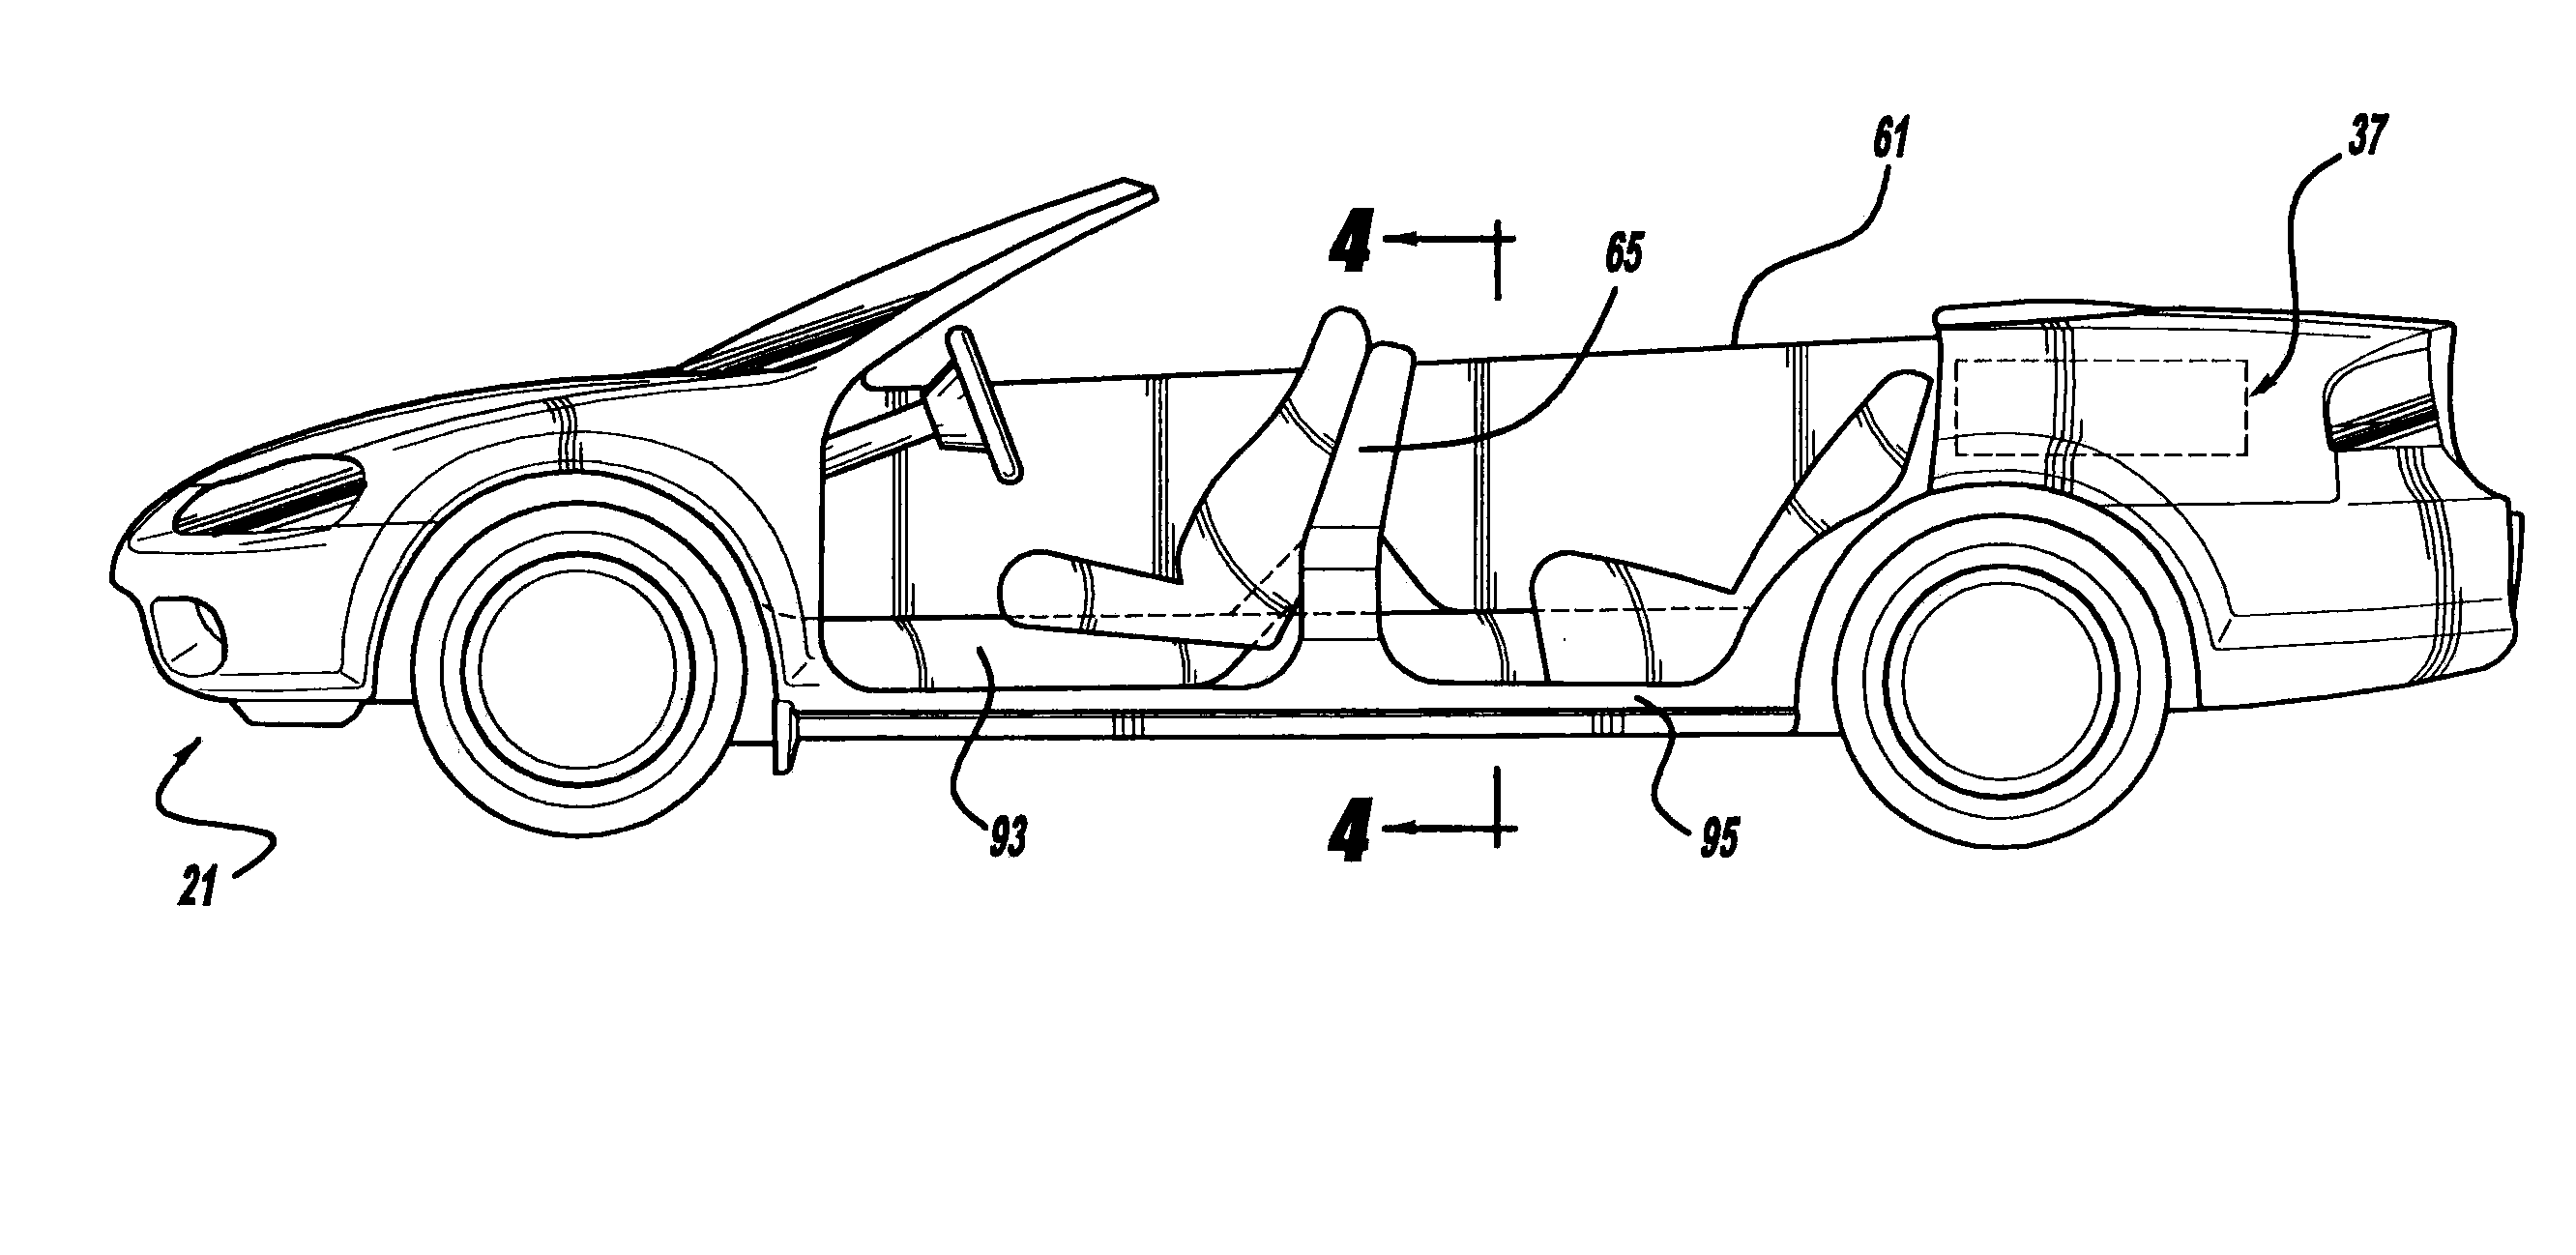 Structural System For An Automotive Vehicle